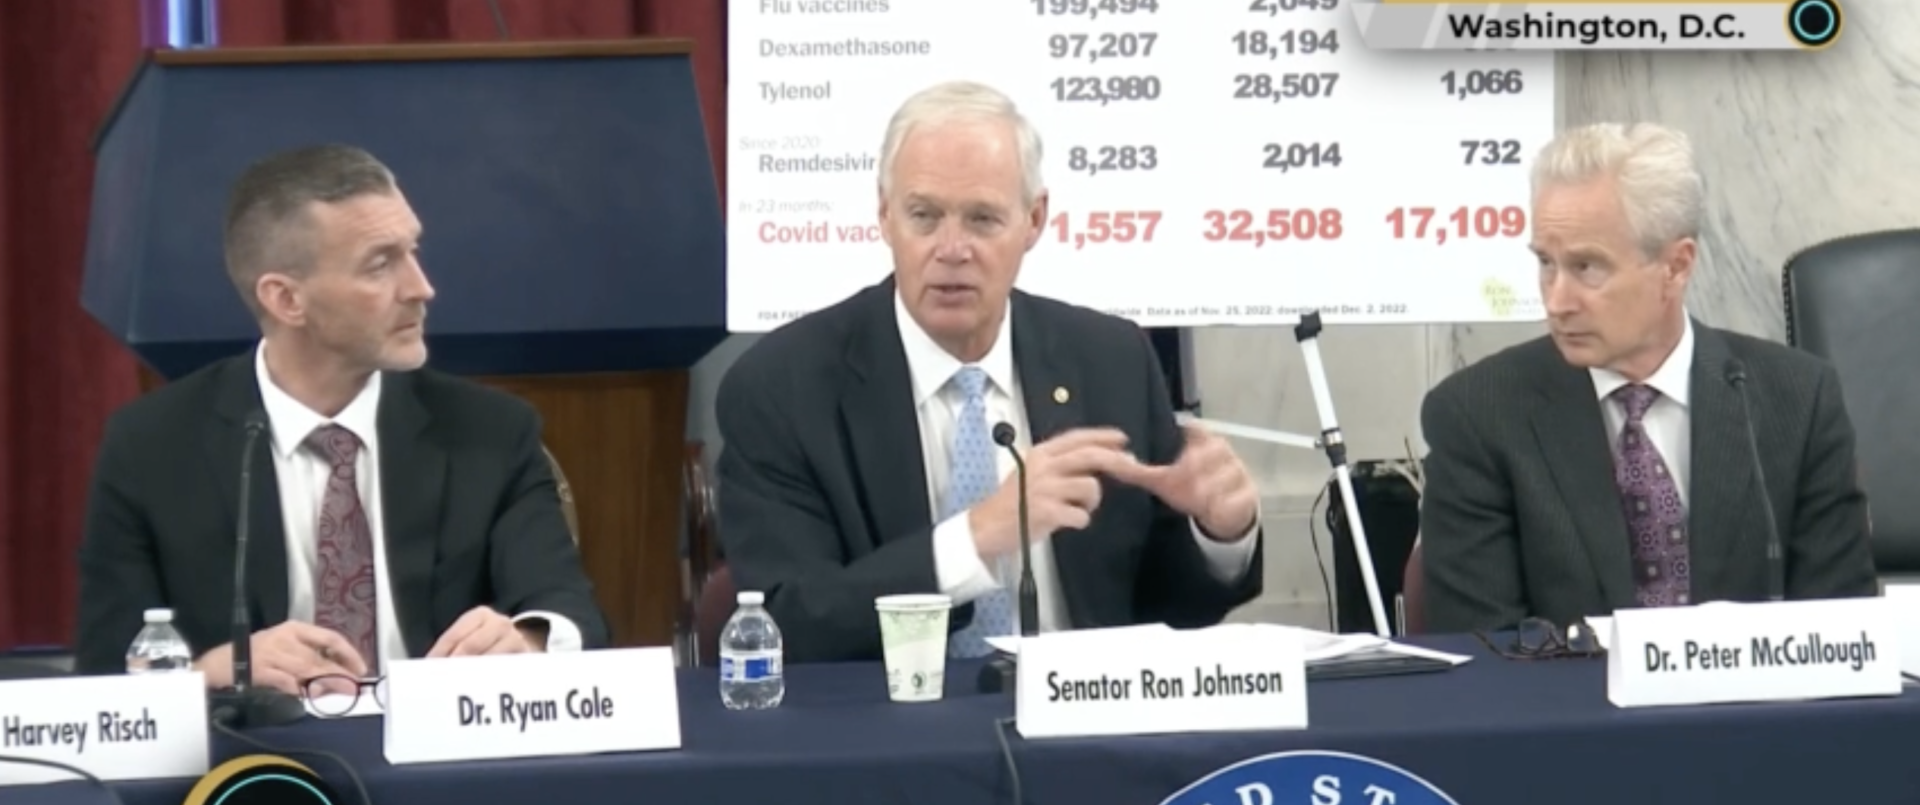 Ron Johnson’s “vaccine round table” does little to actually help patients.